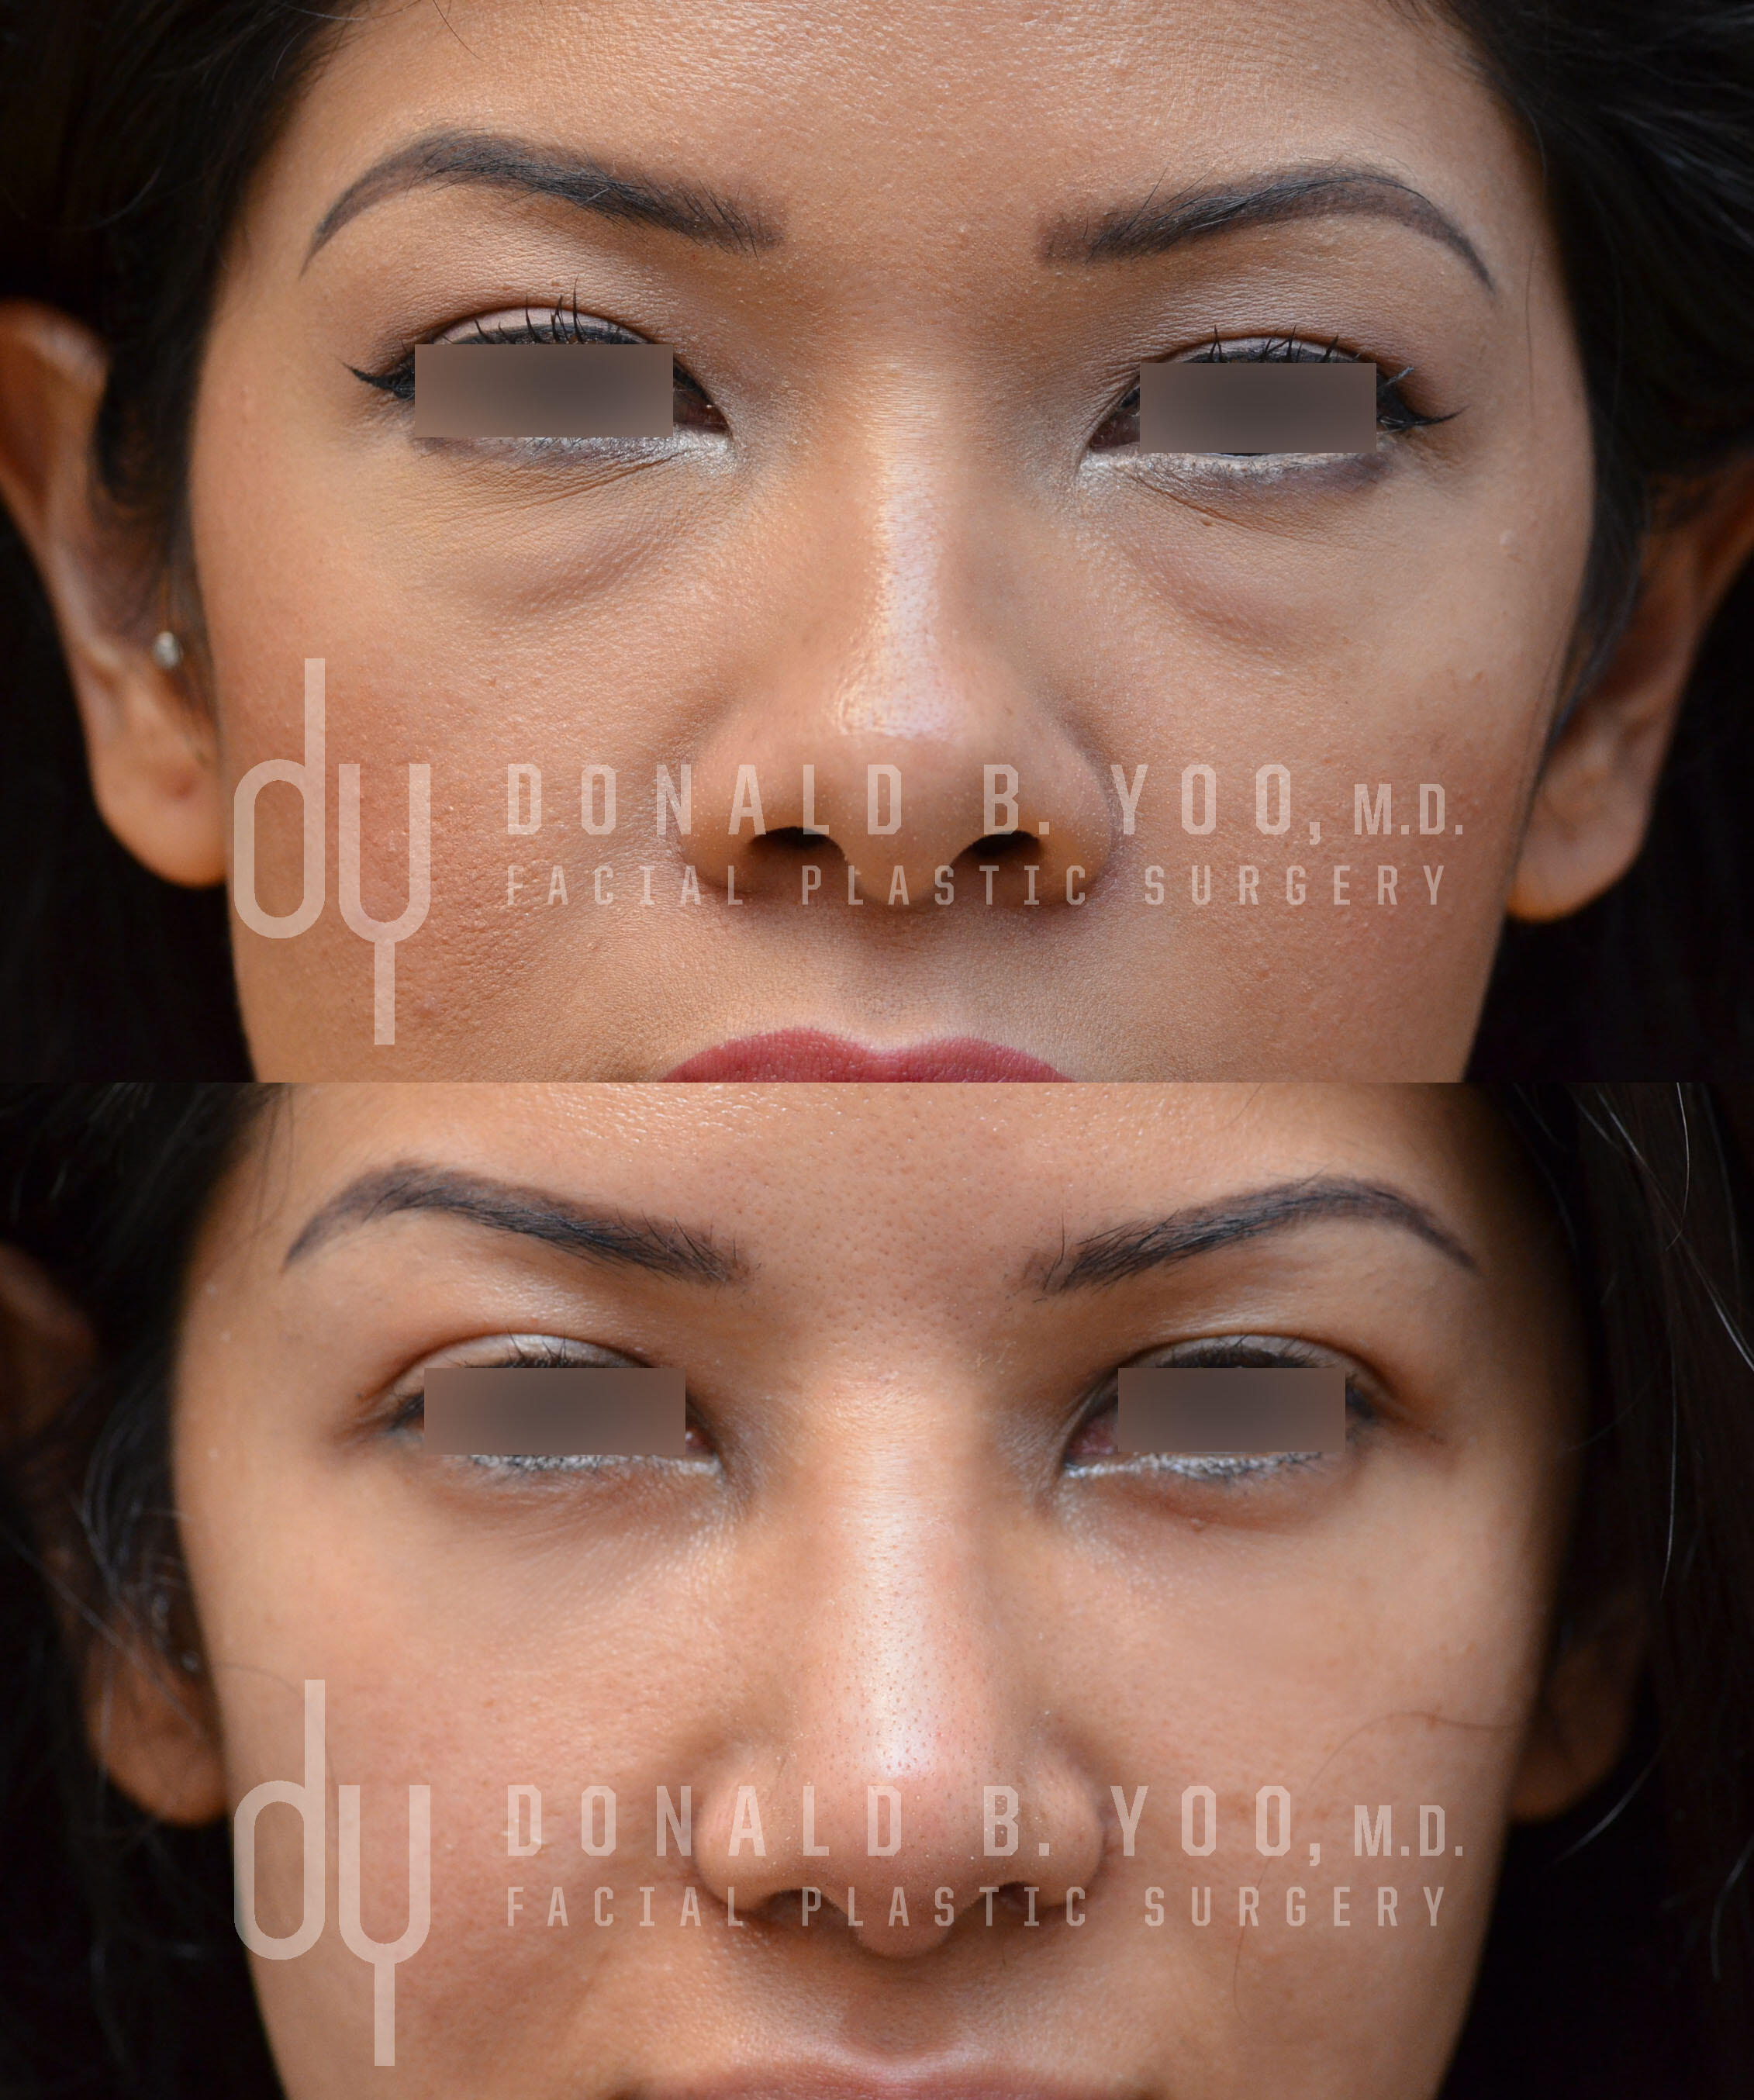 SURGICAL :: BLEPHAROPLASTY<br>Lower Blepharoplasty with Fat Repositioning